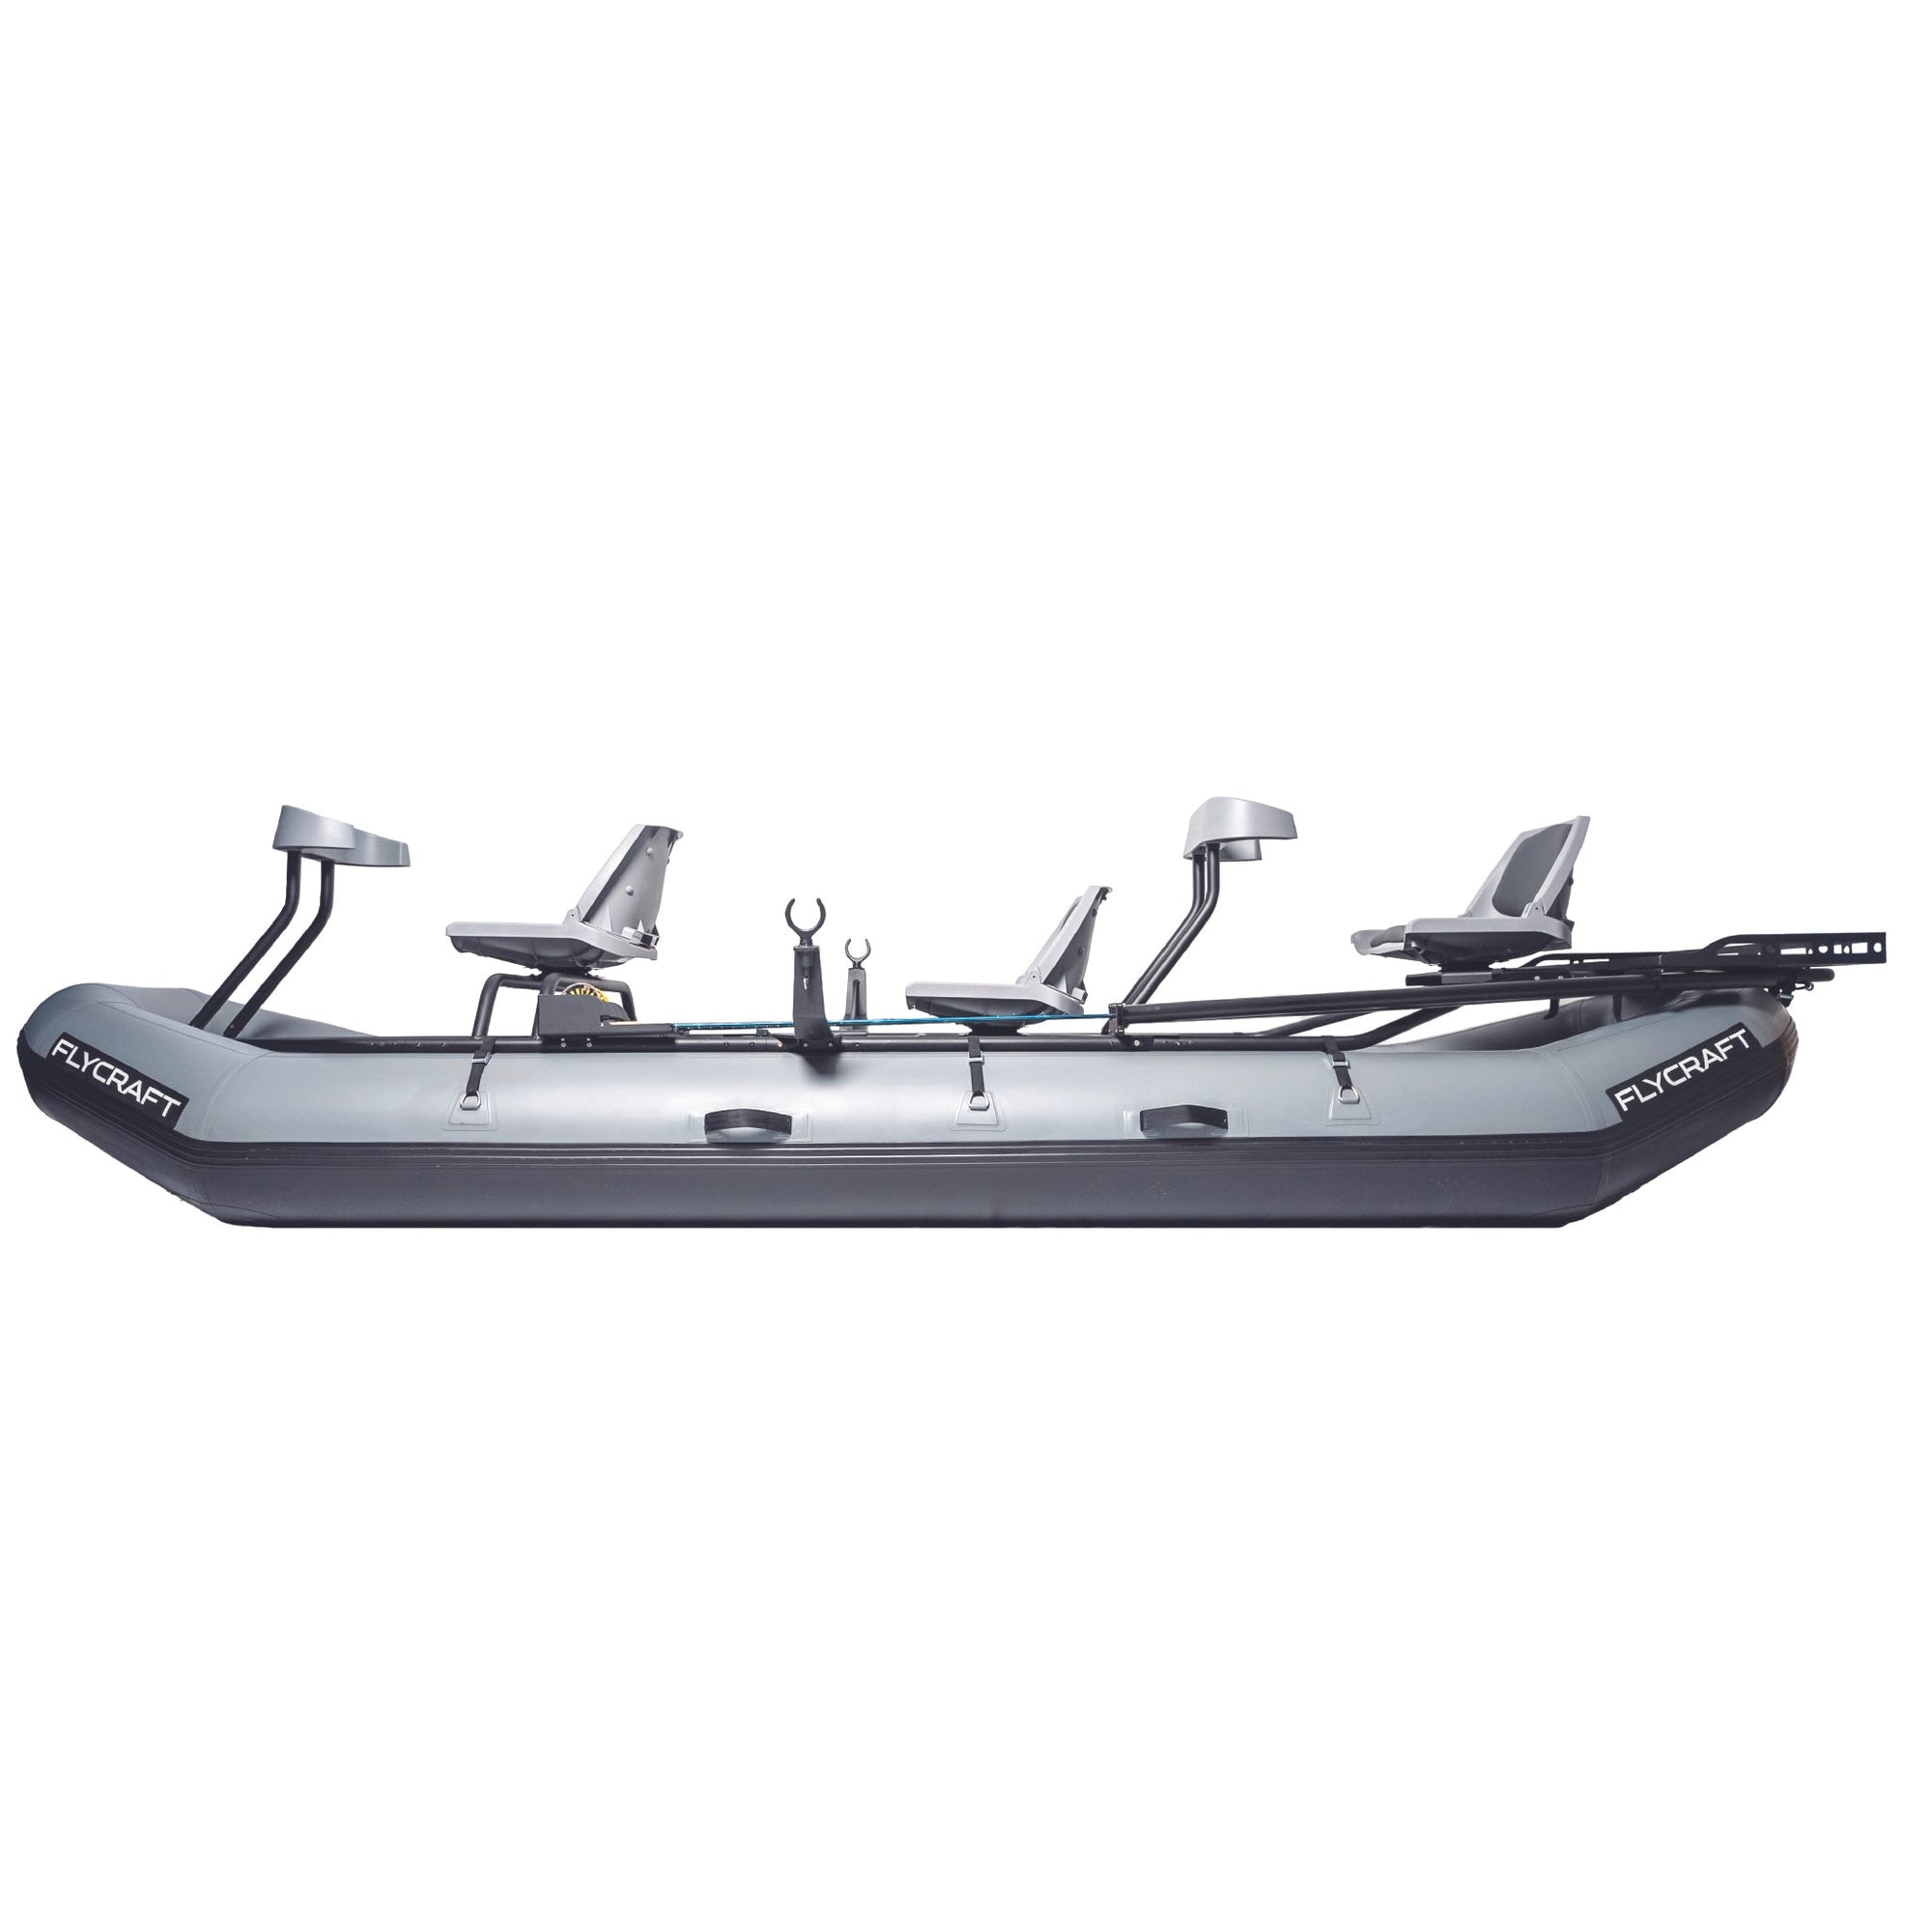 Fishing boat accessories Customized Stainless steel